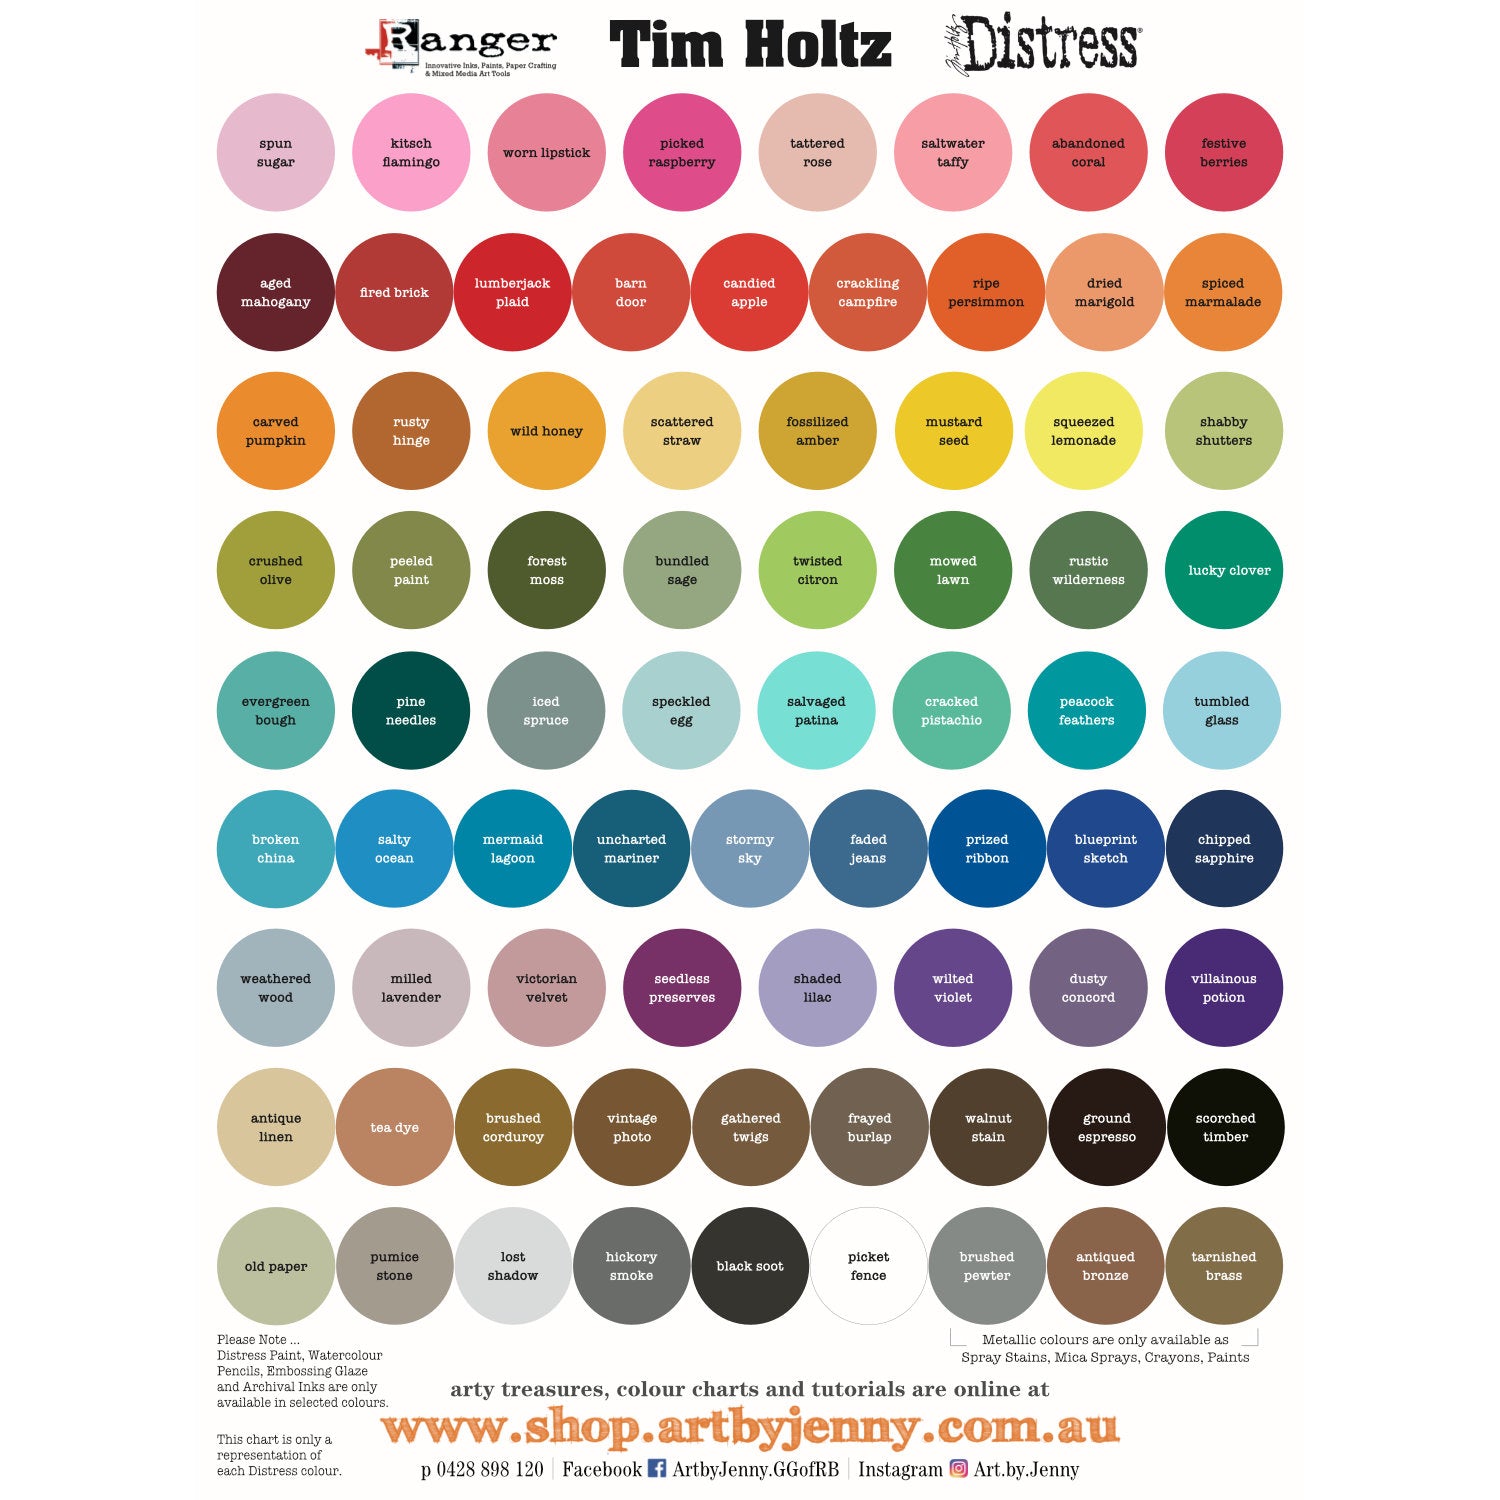 Colour Chart of Tim Holtz Distress Oxide Spray Stains to use for quick and easy colourful coverage on porous surfaces (fabric, ribbons, papers, chipboard, wood). Spray through stencils, layer colours, spritz or flick with water and watch the colours mix and blend. Fantastic for all kinds of visual arts including cardmaking, scrapbooking, mixed media and journaling. Made by Ranger - For sale in Australia at Art by Jenny